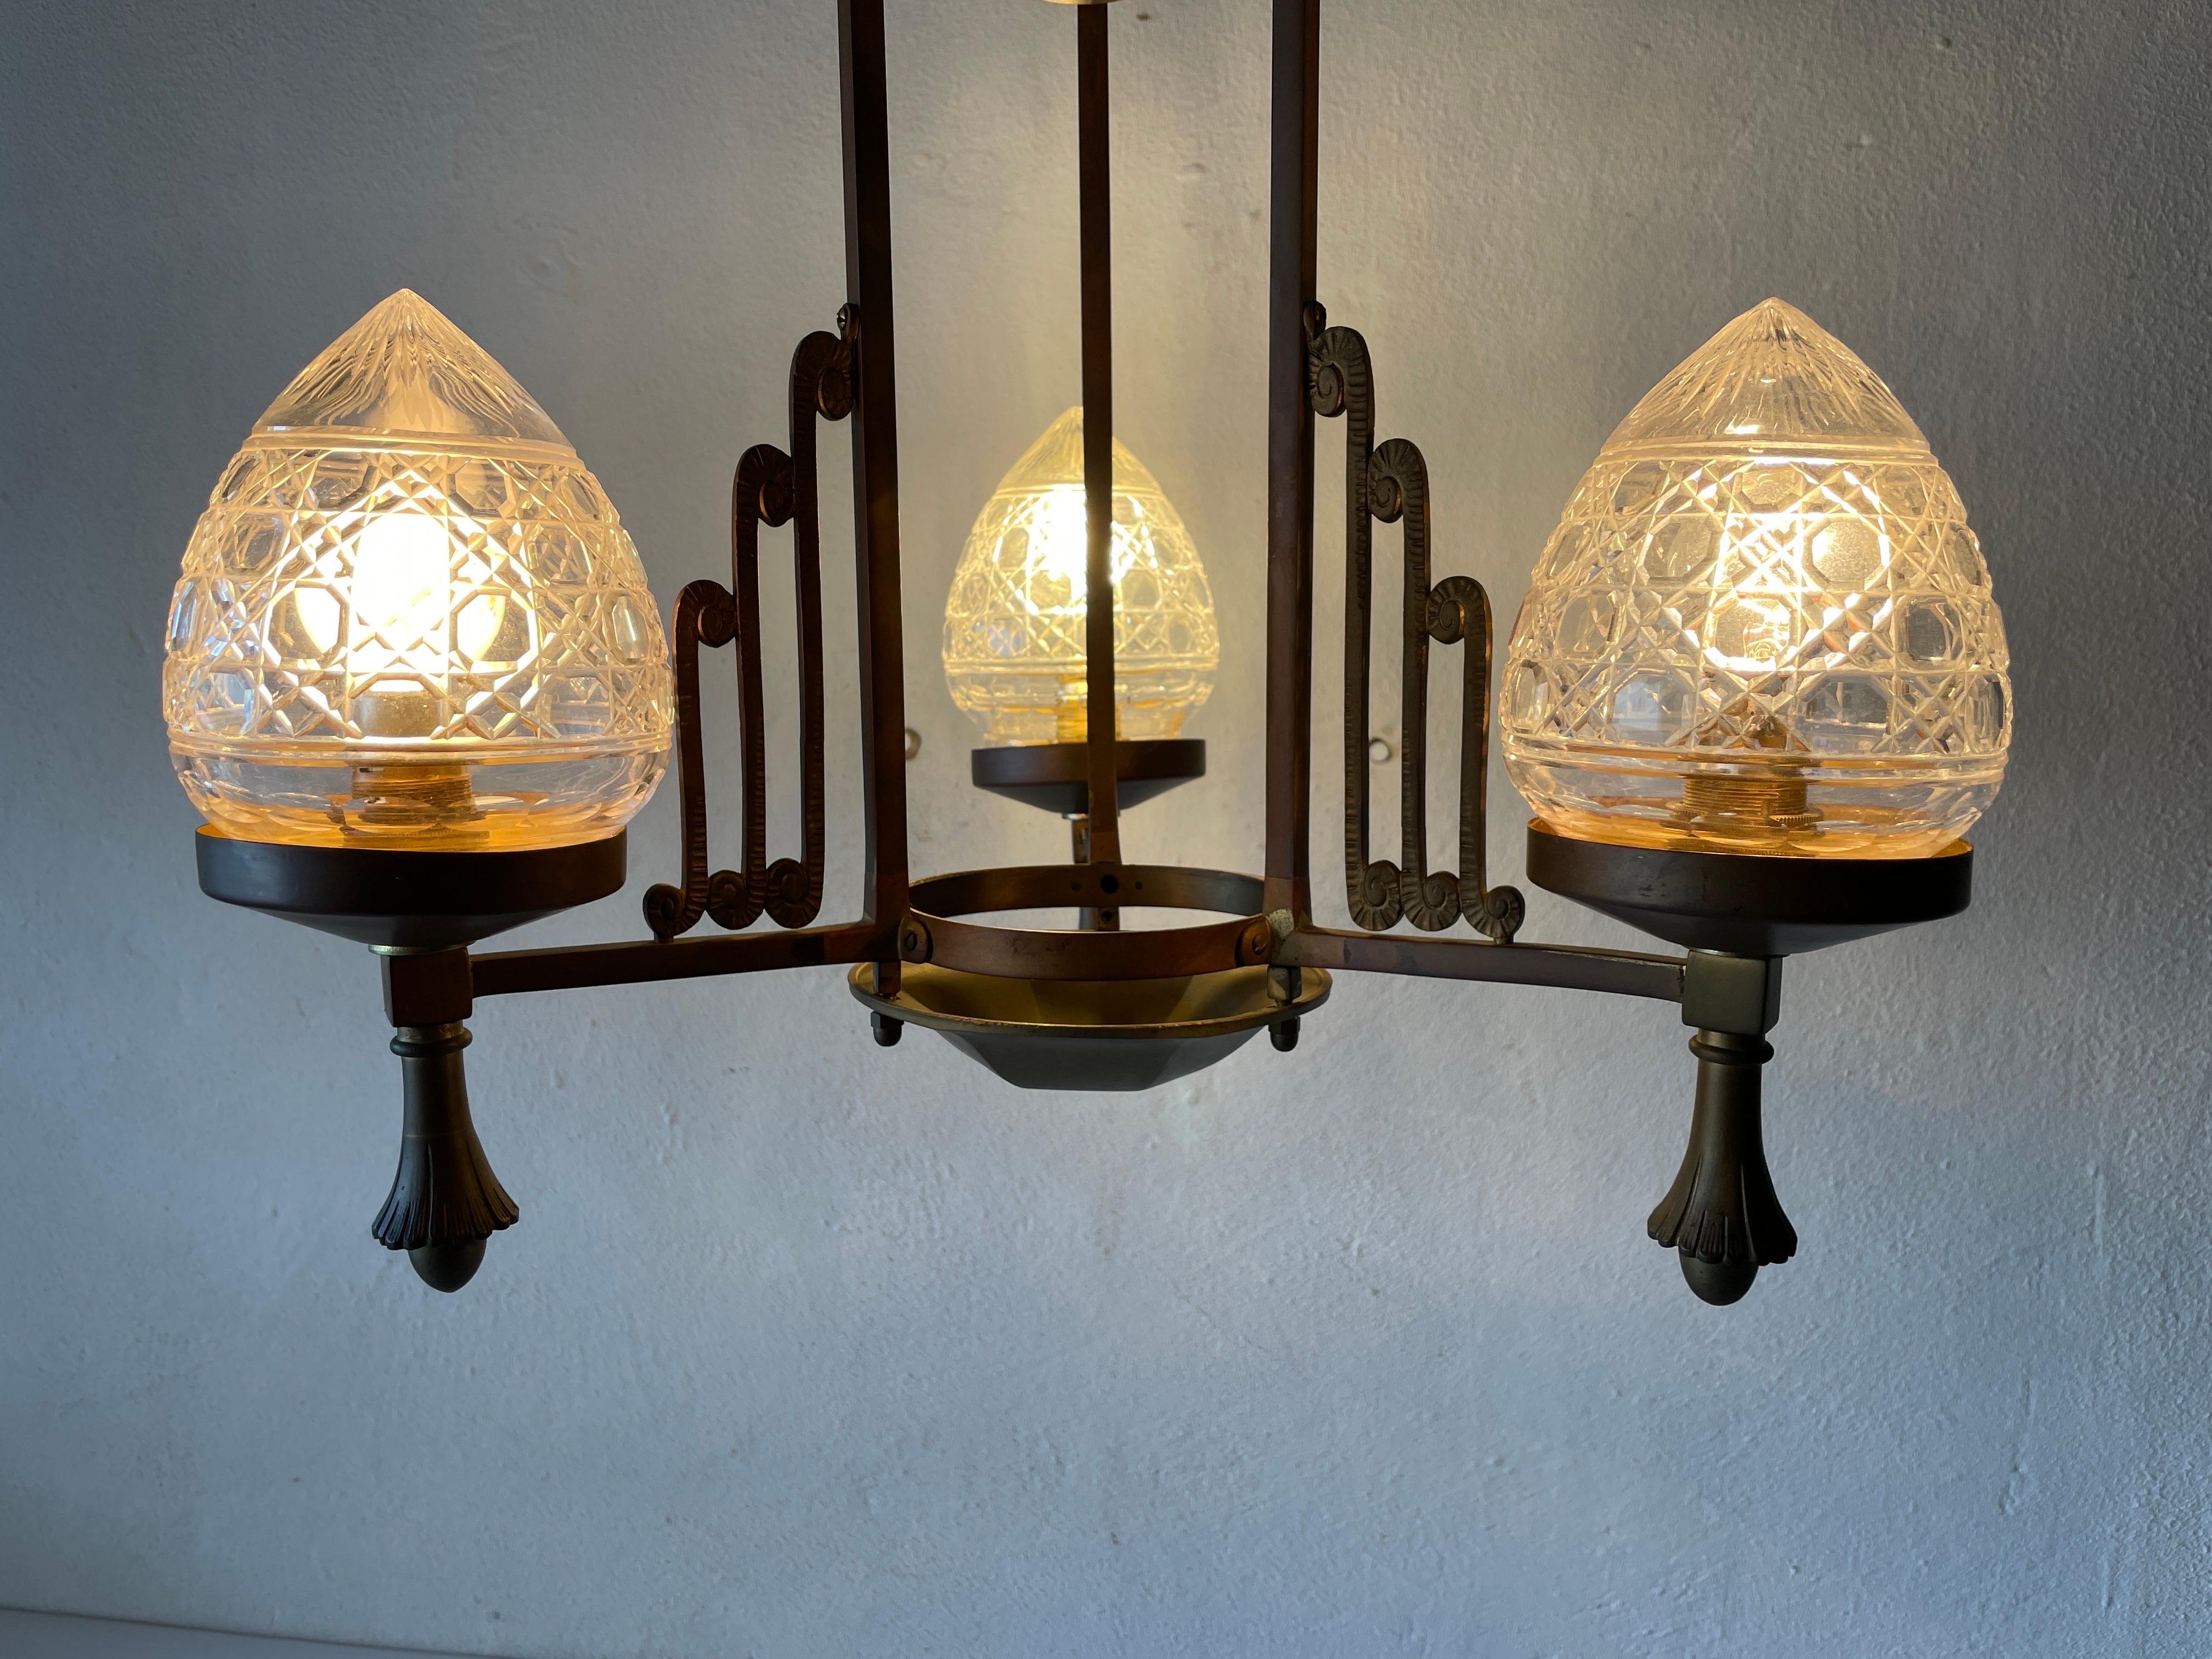 Unique French Copper Architectural Body Chandelier, 1940s, France For Sale 9